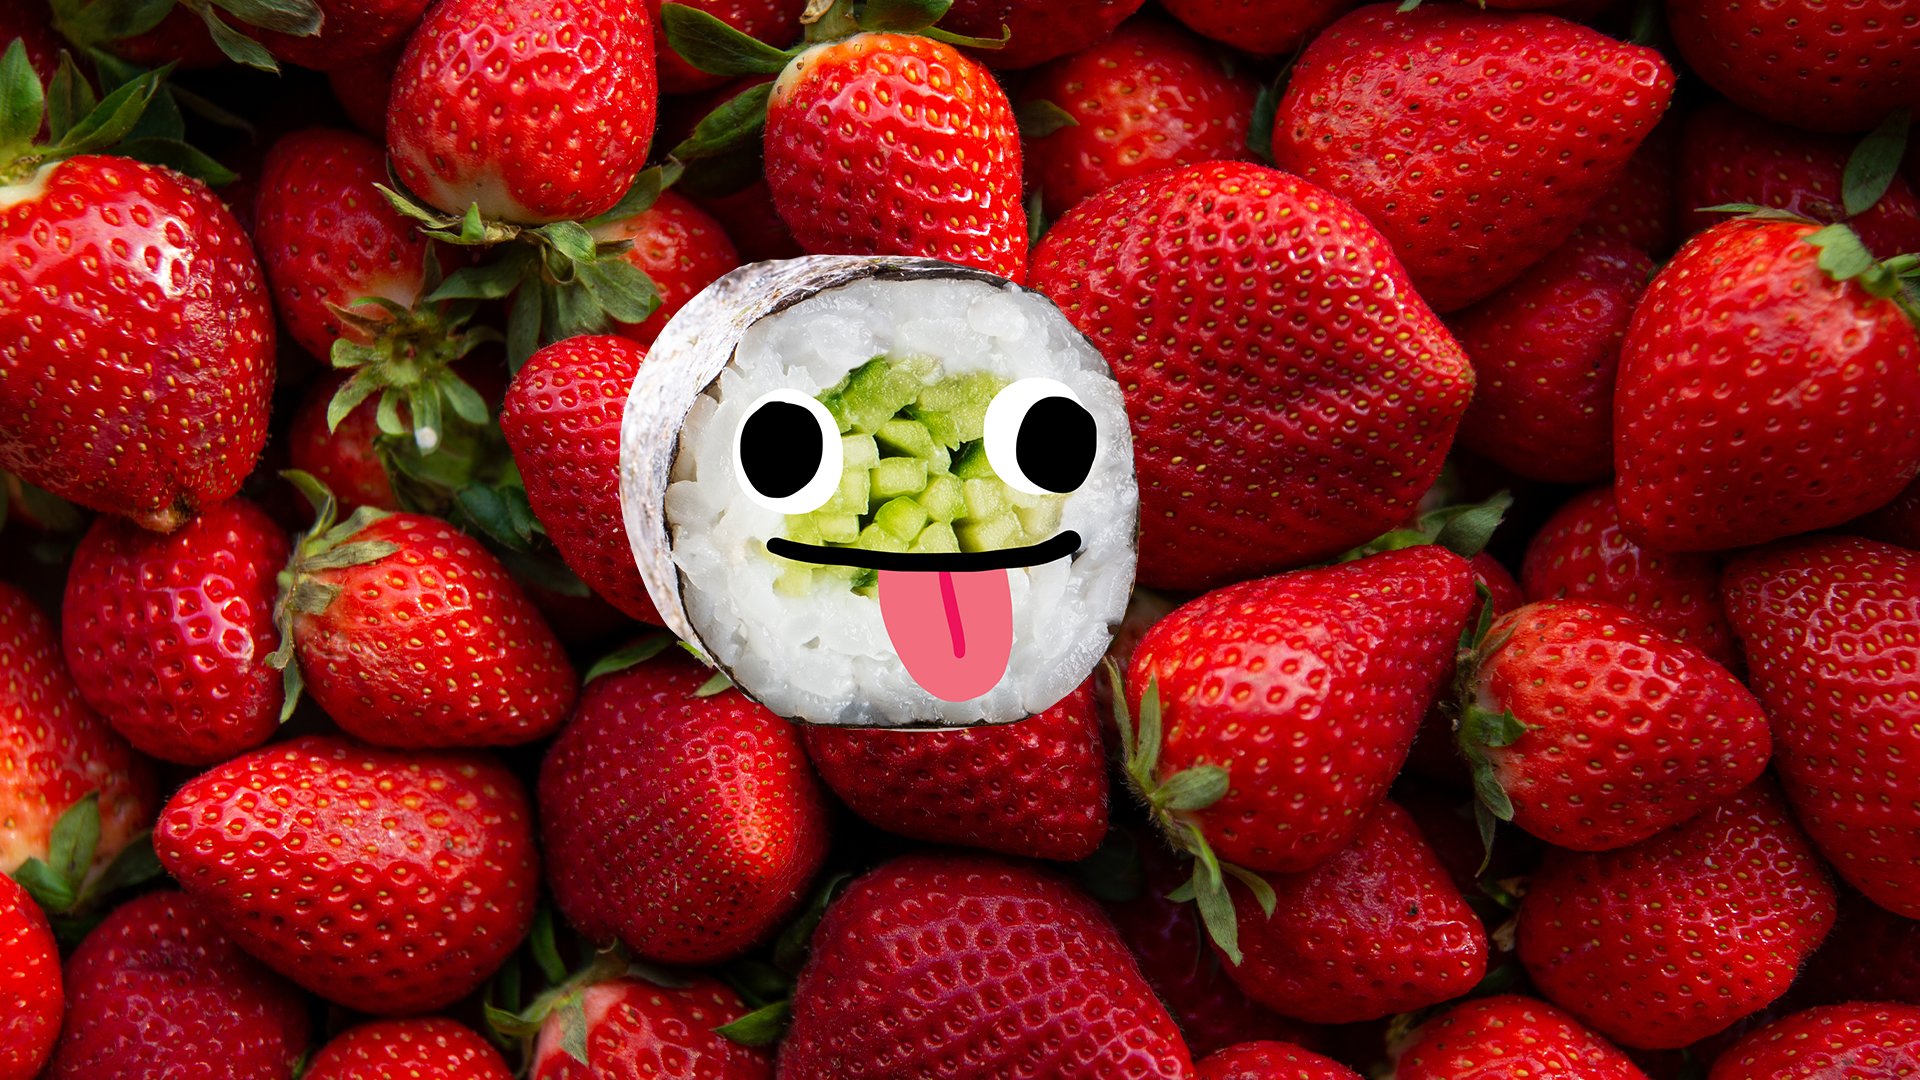 Strawberries and derpy sushi 